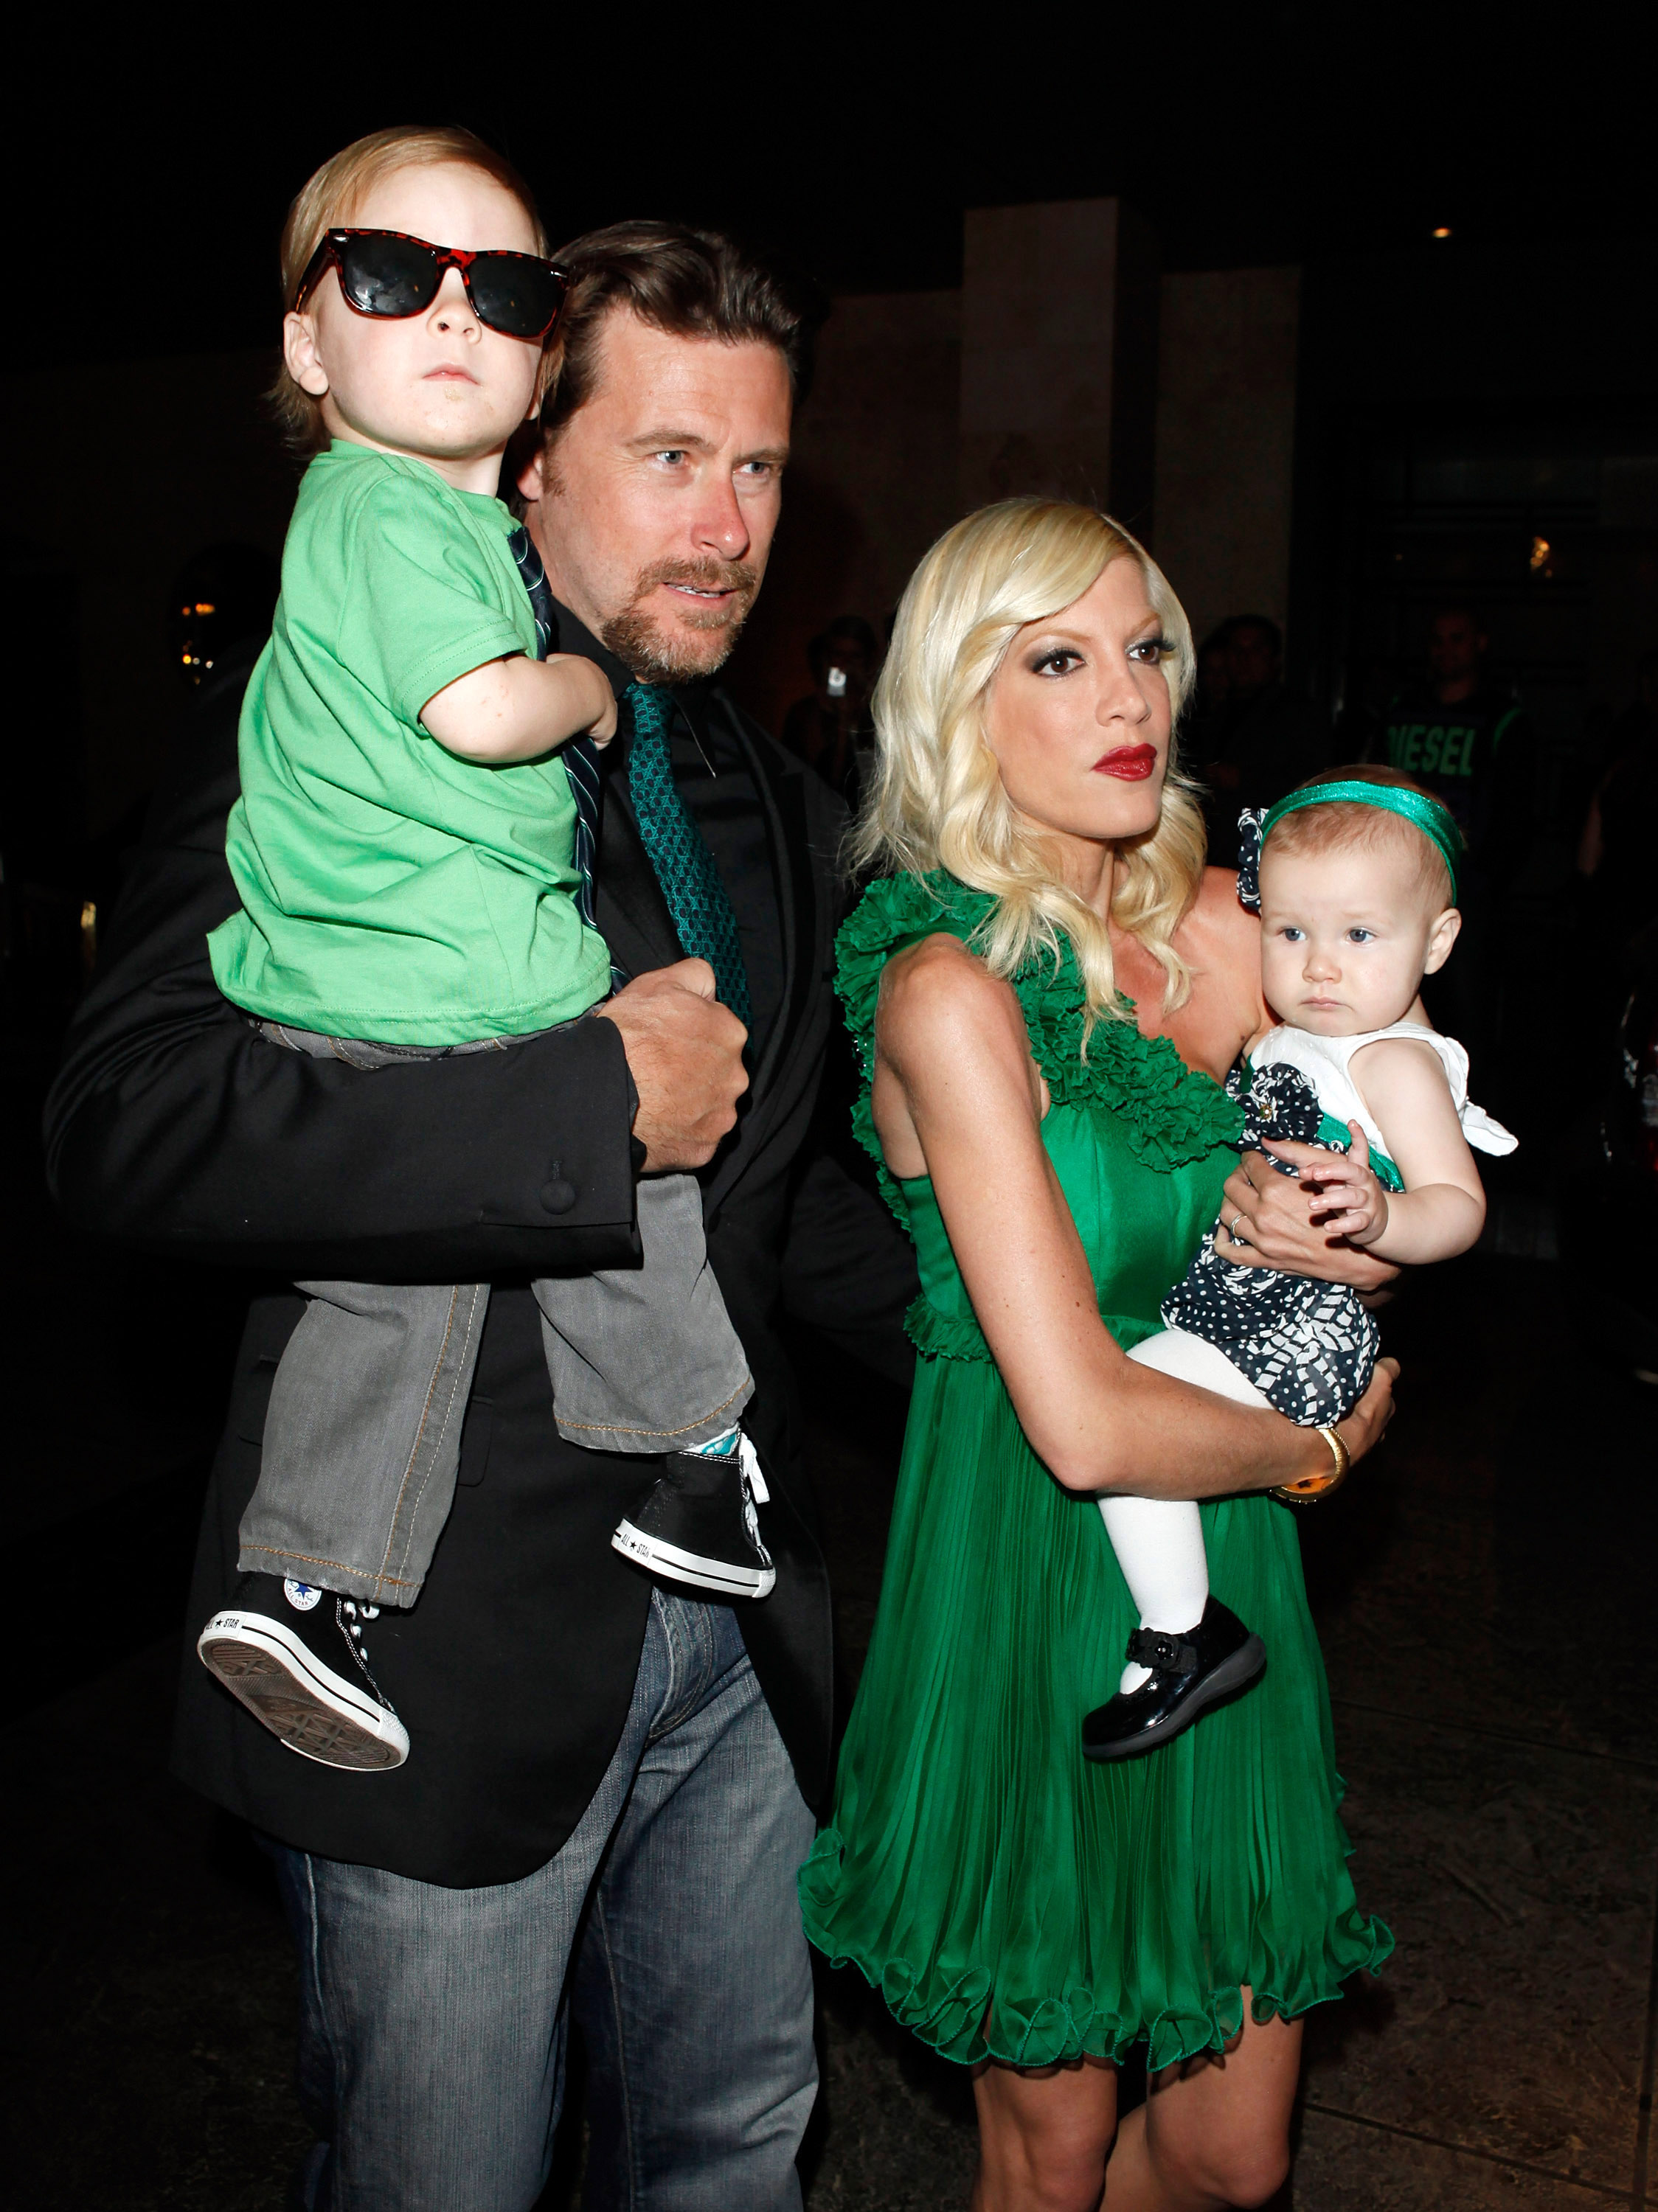 Liam Aaron McDermott, Dean McDermott, Tori Spelling, and daughter Stella Doreen on April 13, 2009 in Beverly Hills, California. | Sources: Getty Images